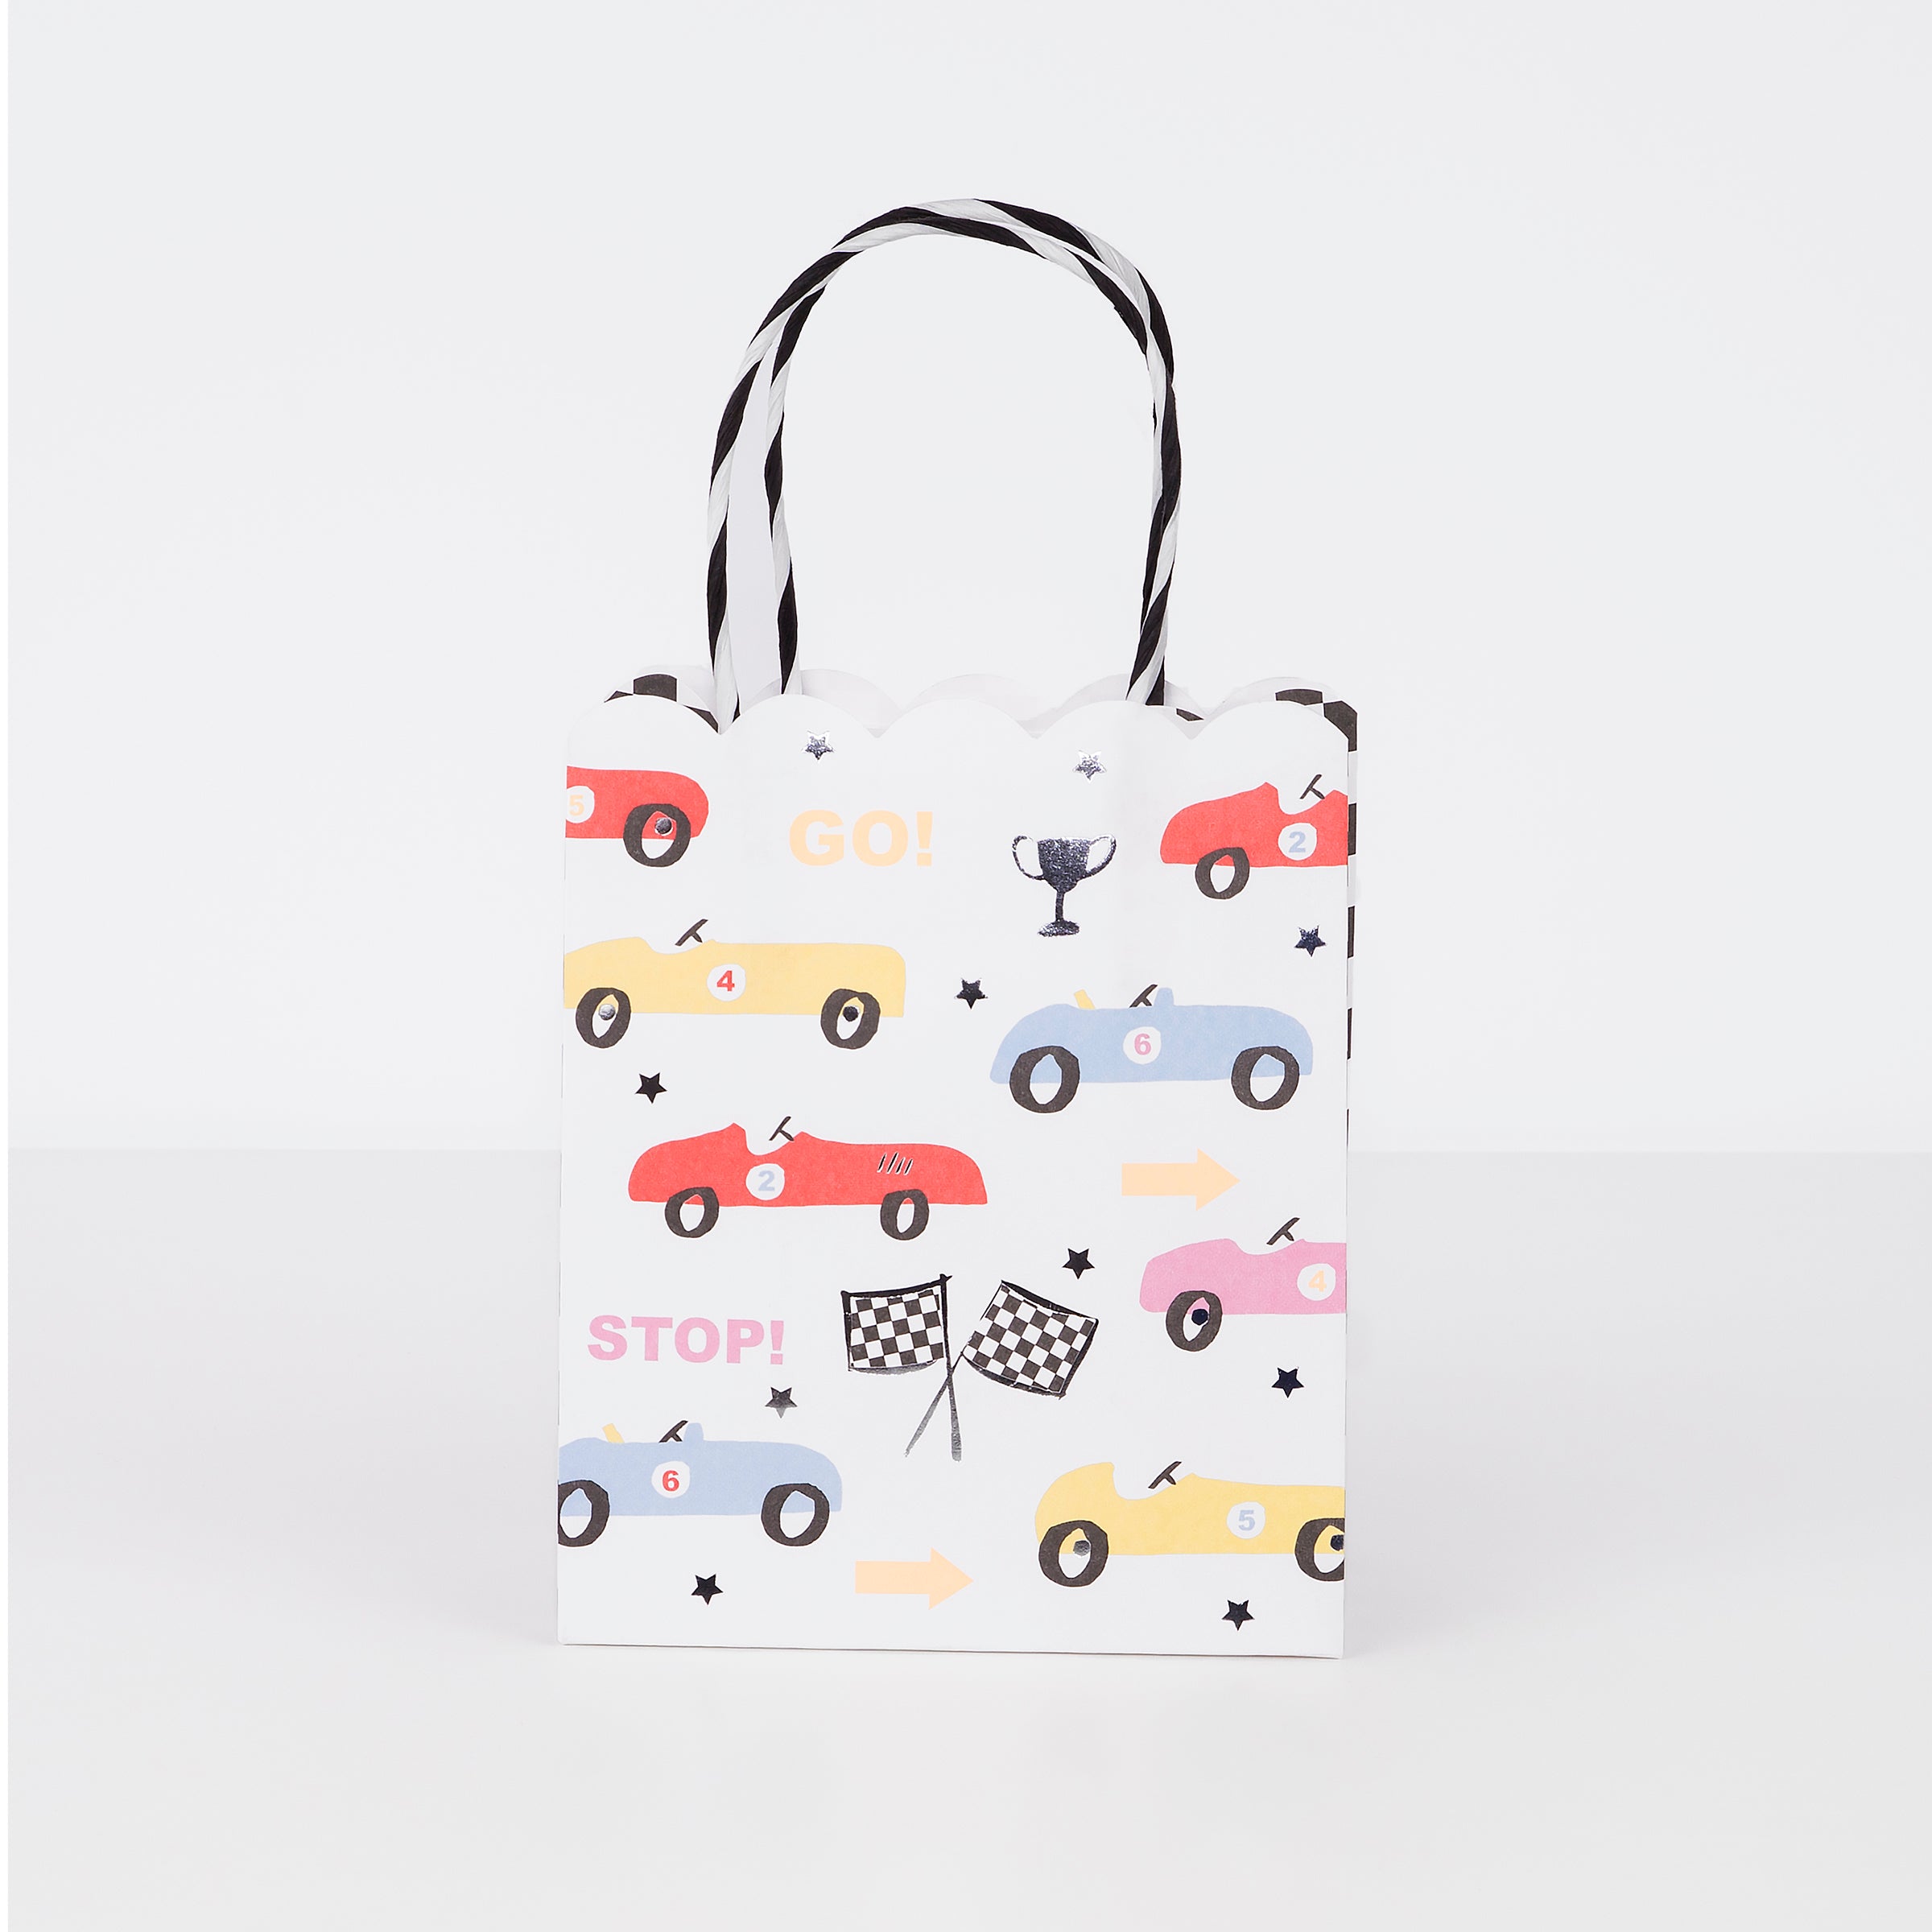 These colourful race car paper bags are great to fill with party favours for a race car birthday party.